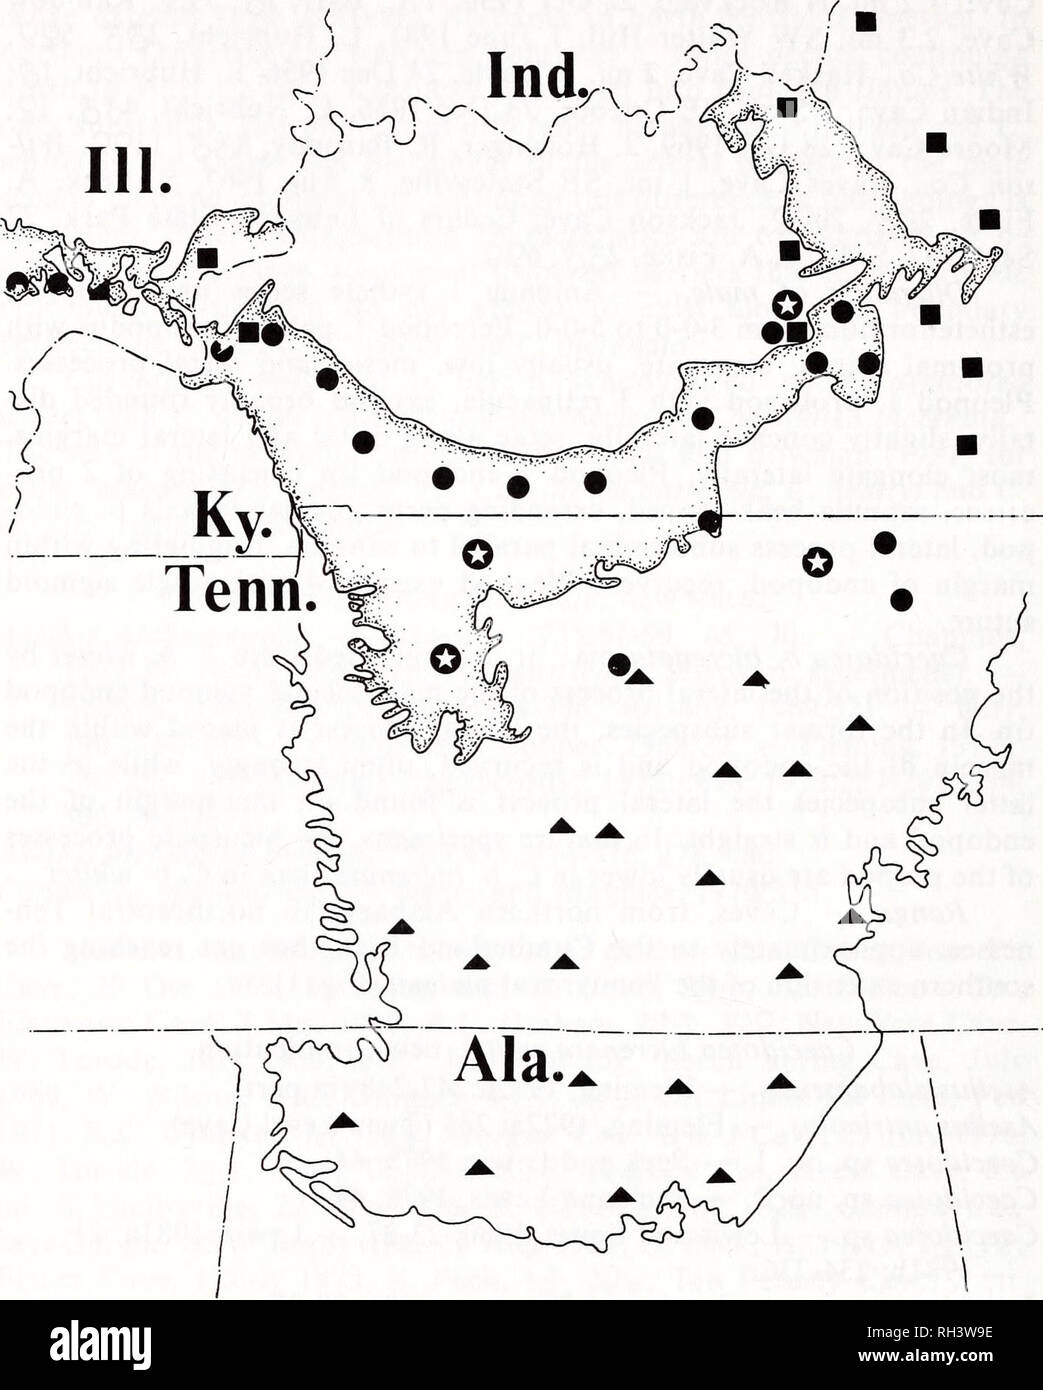 . Brimleyana. Zoology; Ecology; Natural history. 68 Julian J. Lewis. Fig. 1. Distribution of the troglobitic Caecidotea of the southern Interior Low Plateaus: Caecidotea bicrenata bicrenata (triangles); Caecidotea bicrenata whitei (solid circles); Caecidotea bicrenata unidentified subspecies, lacking lateral pro- cess on second pleopod endopod tip (stars); Caecidotea stygia (squares). The stippled region, which comprises most of the range of C. b. whitei, is the Penny- royal Plateau.. Please note that these images are extracted from scanned page images that may have been digitally enhanced for Stock Photo